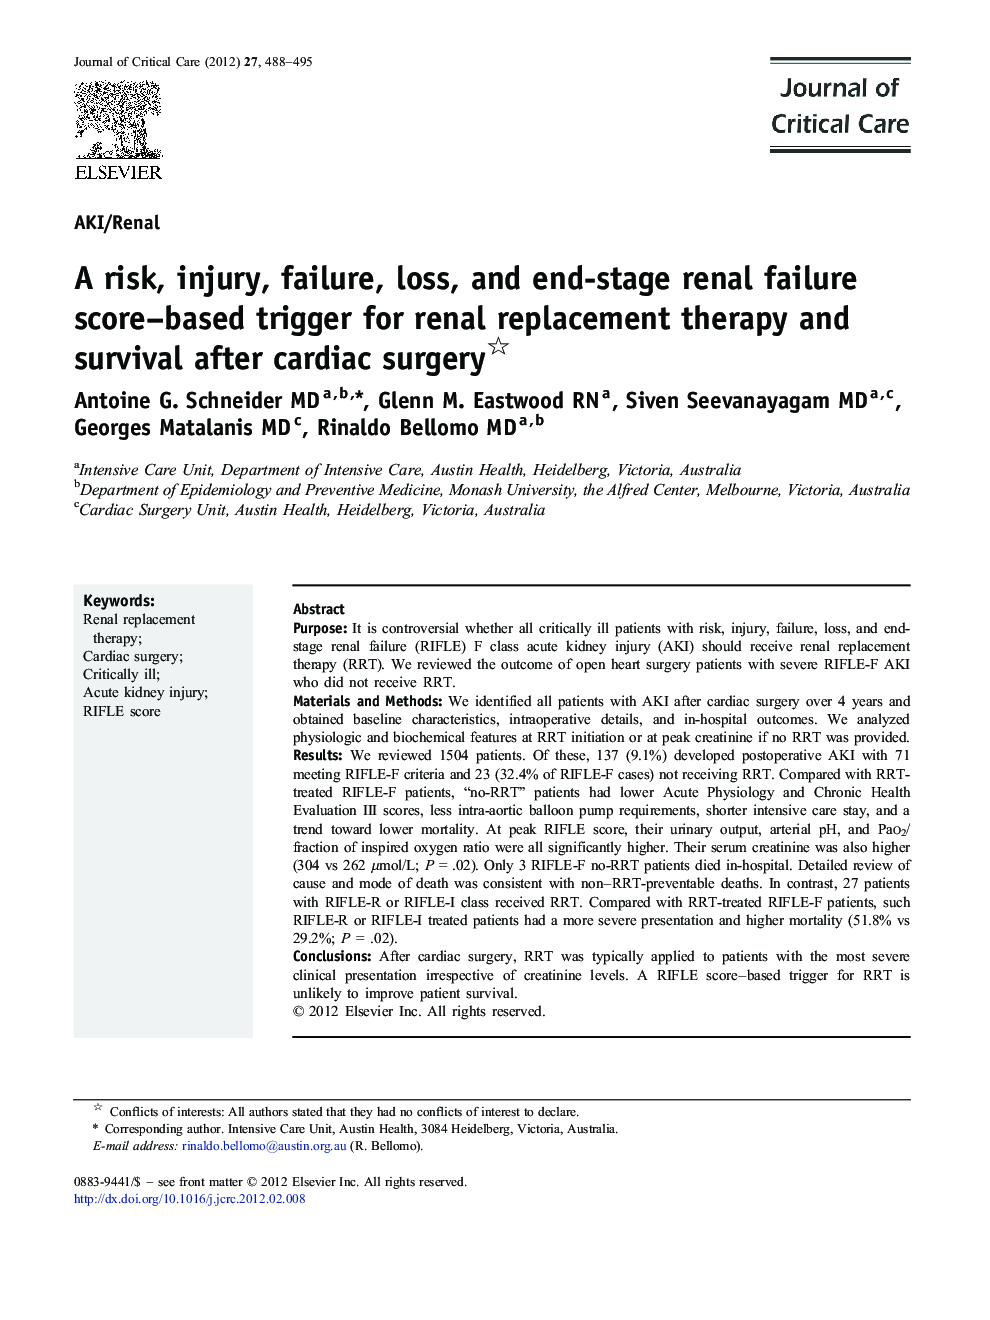 AKI/RenalA risk, injury, failure, loss, and end-stage renal failure score-based trigger for renal replacement therapy and survival after cardiac surgery